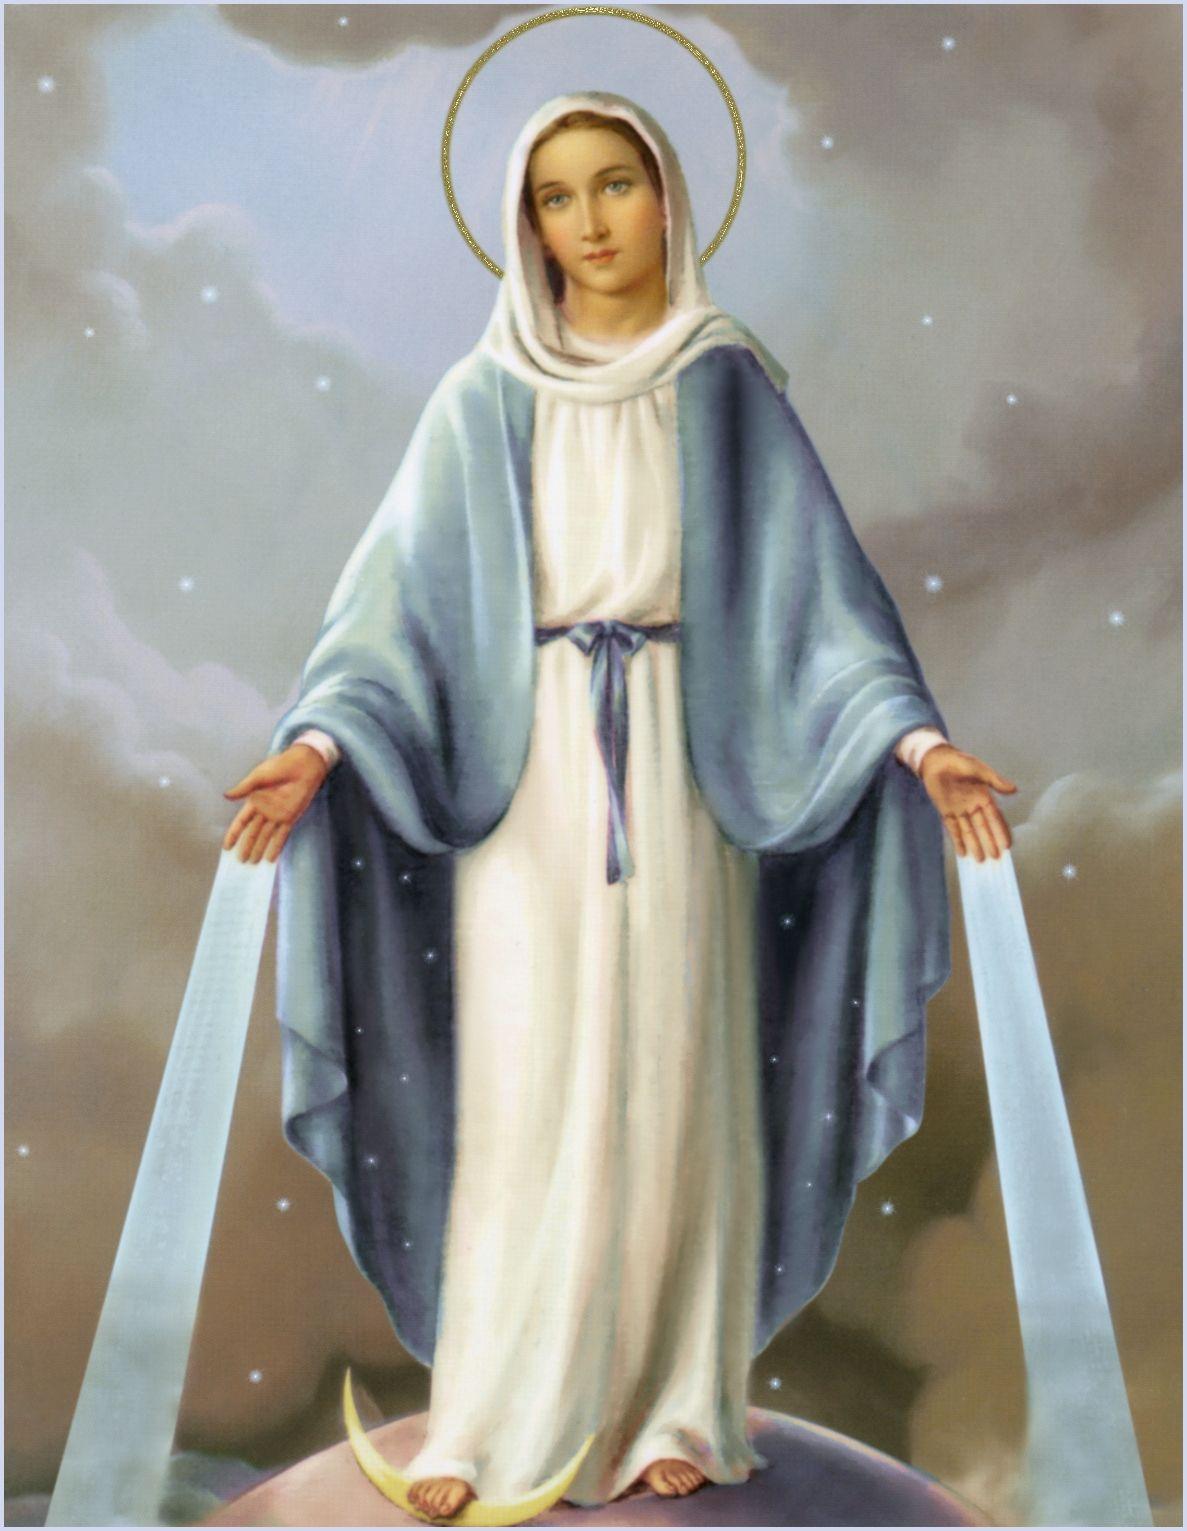 blessed virgin mary HD Wallpaper Download Free blessed virgin mary